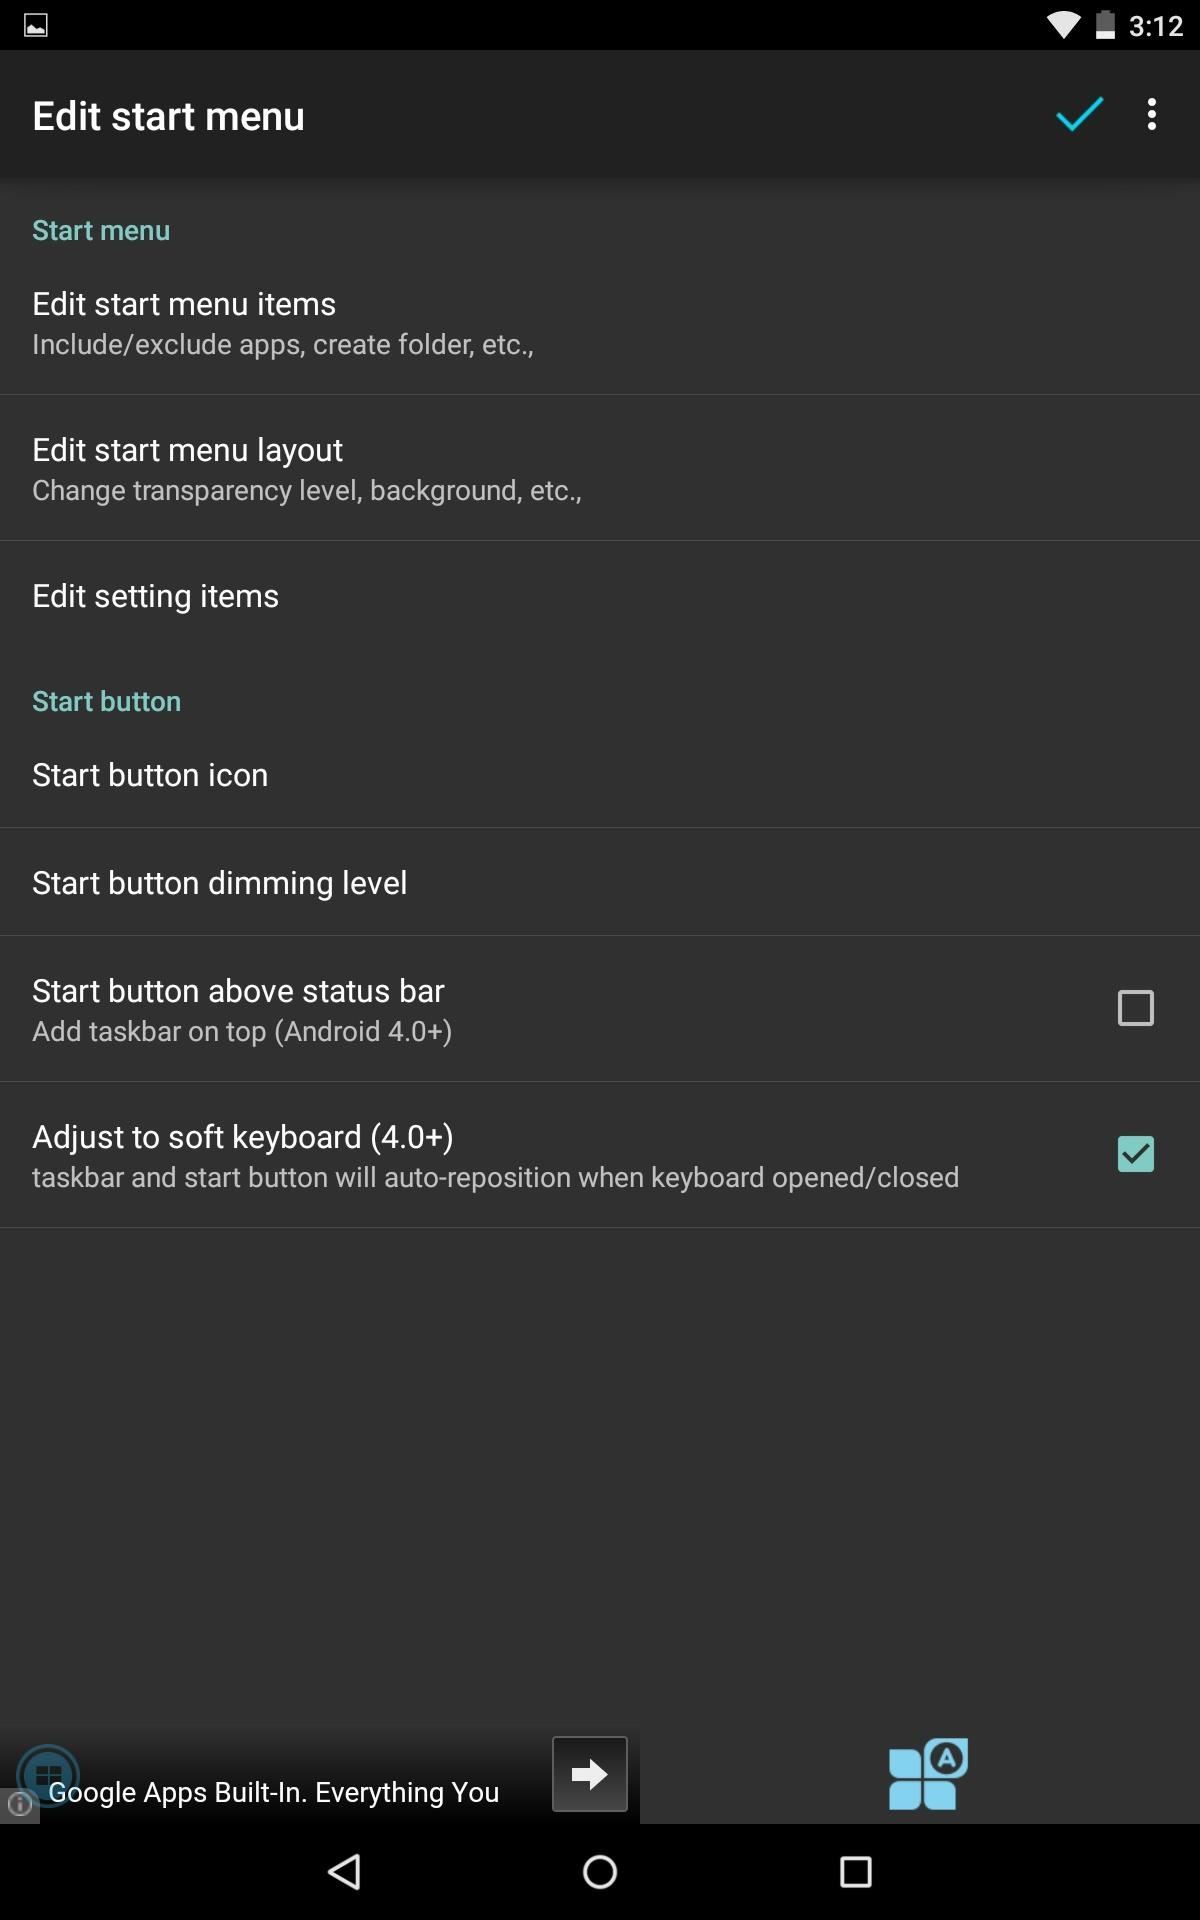 Get a Windows-Inspired Start Menu on Your Android